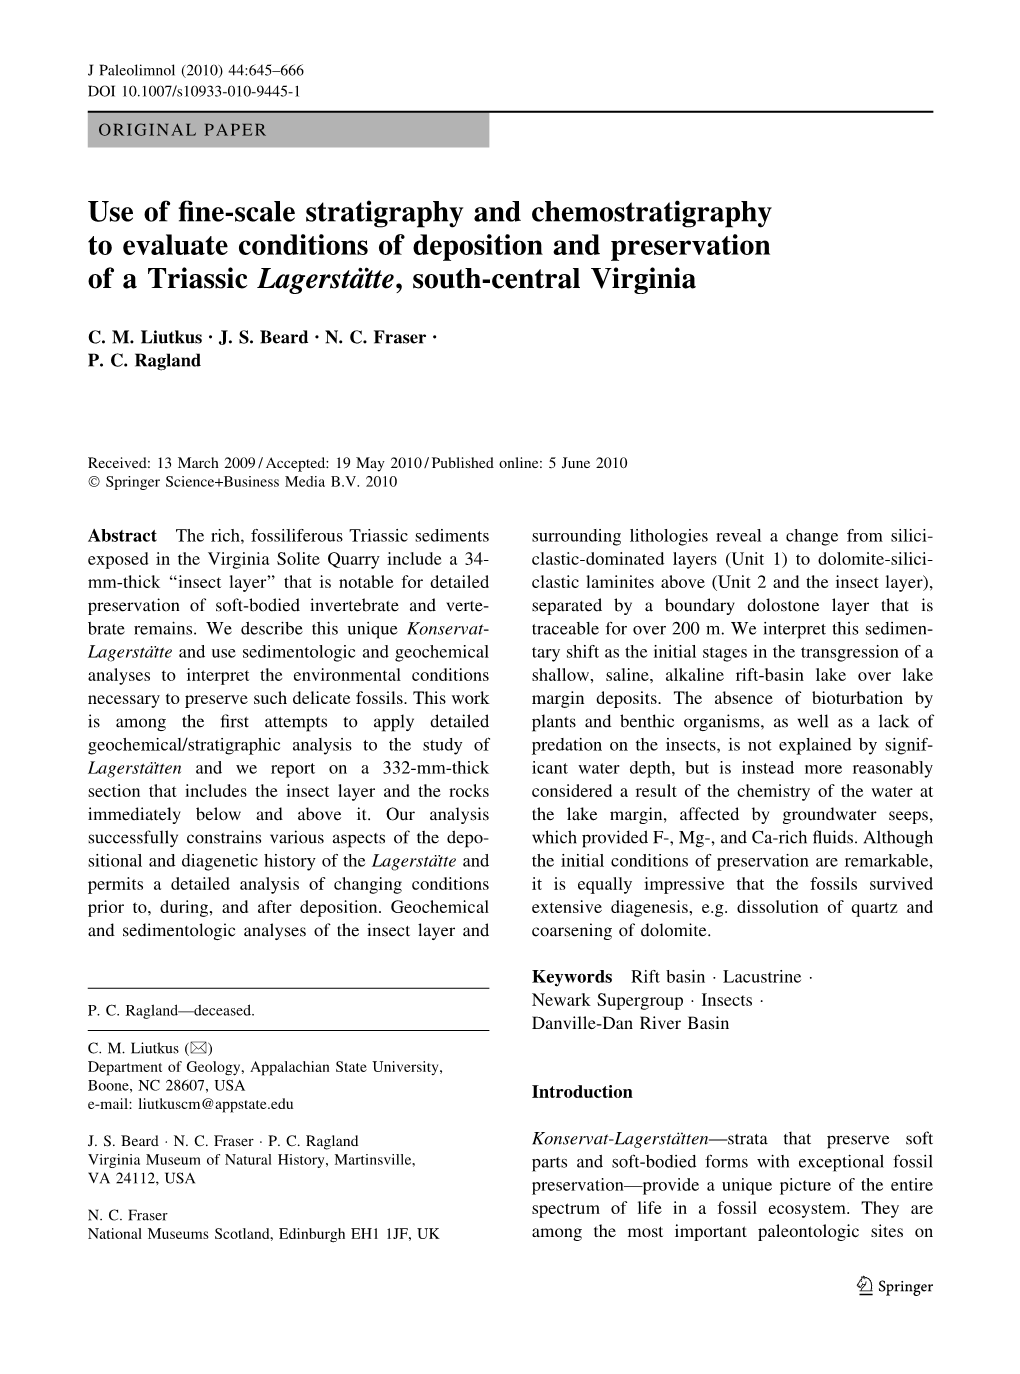 Use of Fine-Scale Stratigraphy and Chemostratigraphy to Evaluate